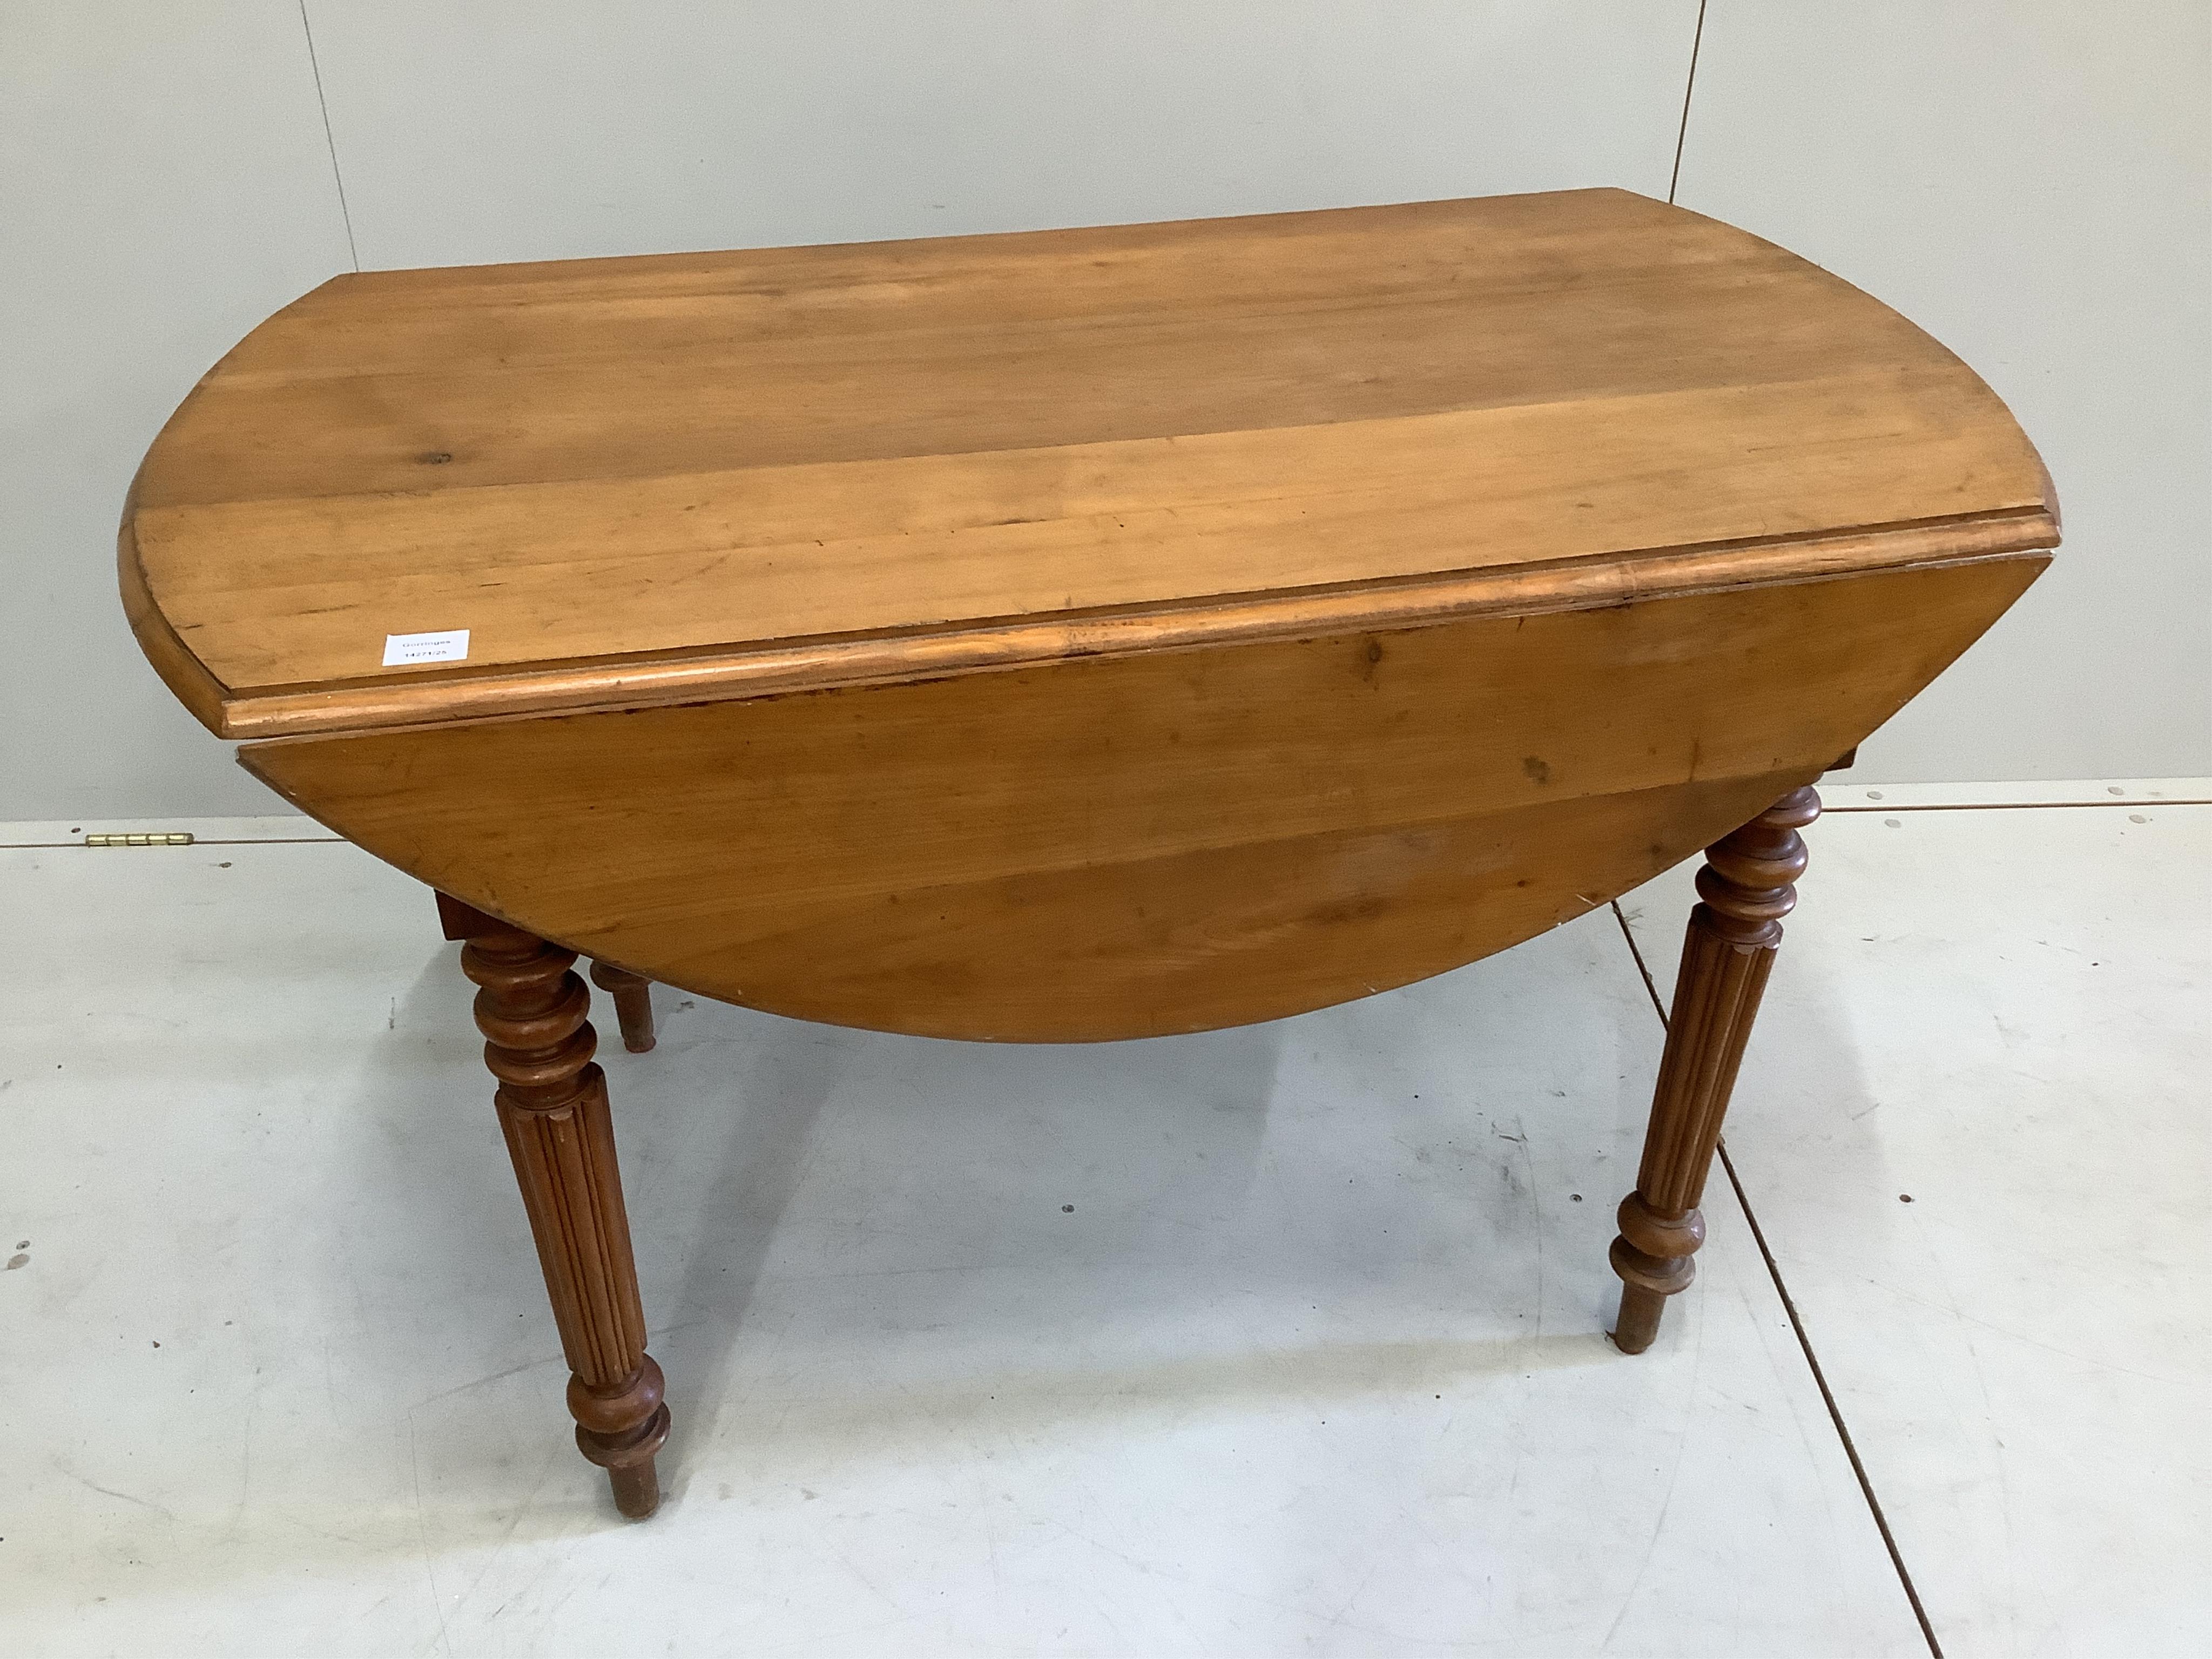 A 19th century French pine drop leaf kitchen table, width 118cm, depth 66cm, height 72cm